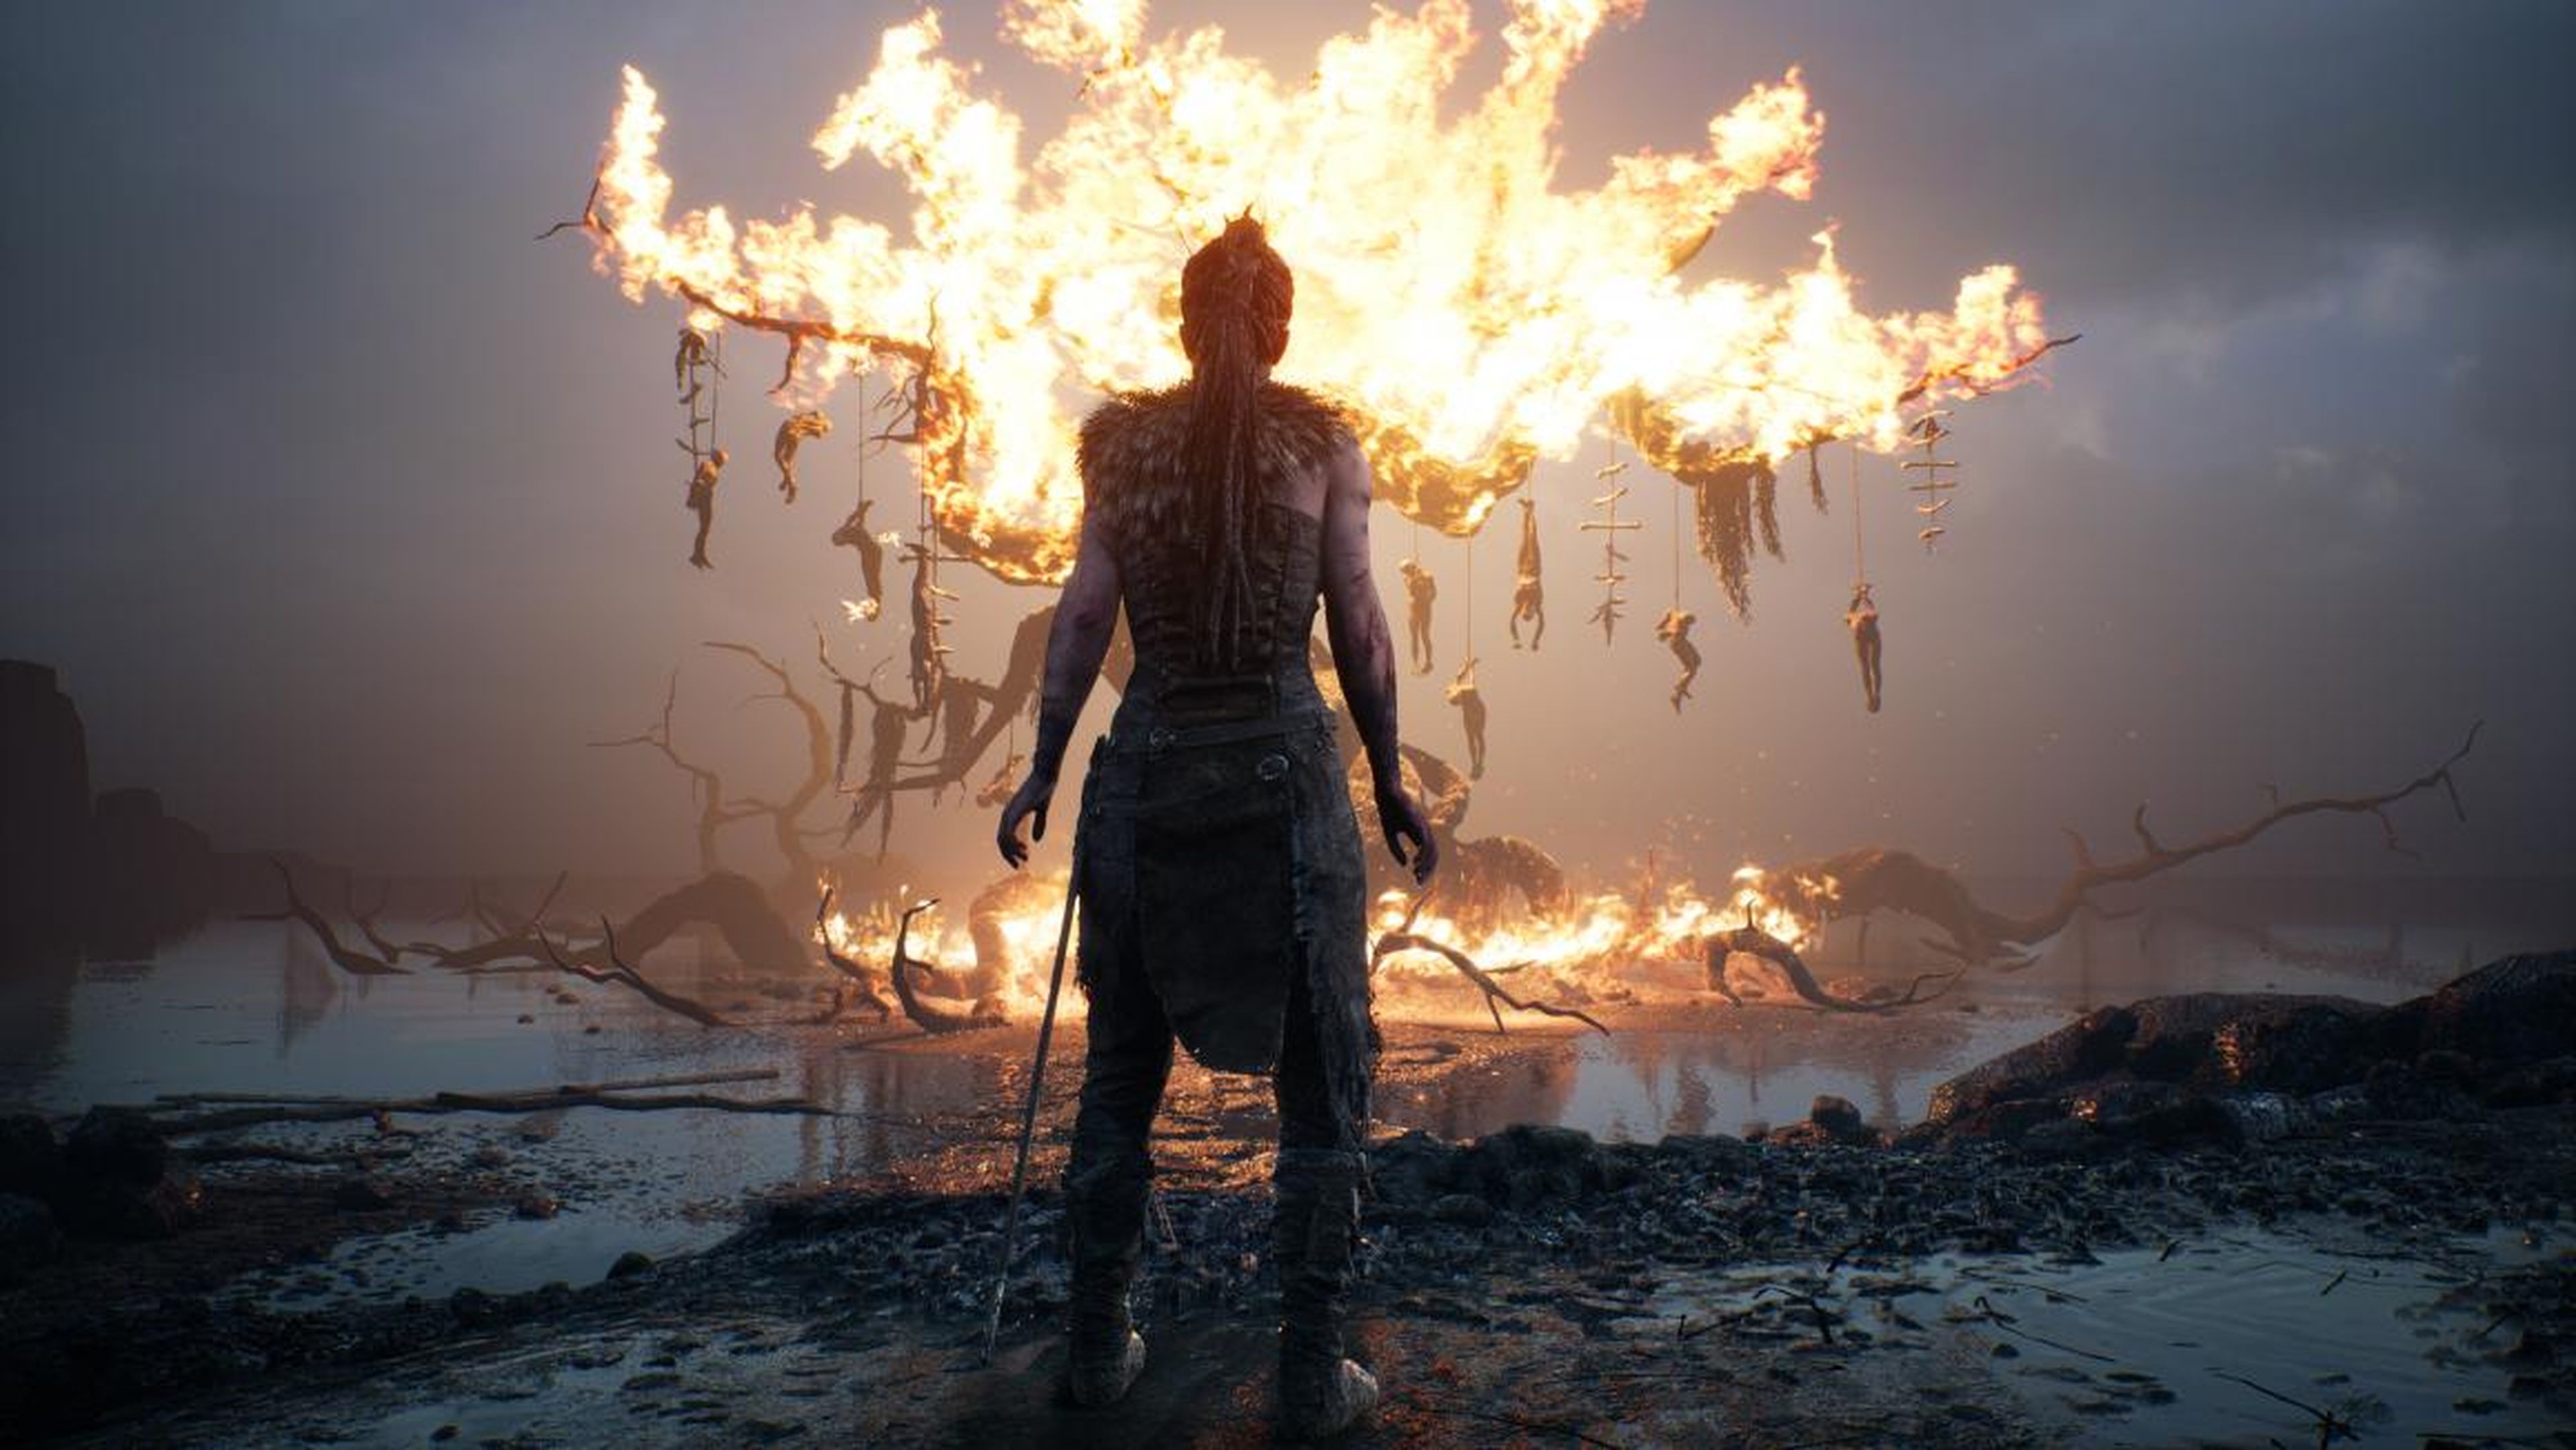 "Hellblade: Senua's Sacrifice," a hack-and-slash horror game, is set to release on the Switch in April. The game received critical acclaim when it was released for PC and PlayStation 4 in 2017.